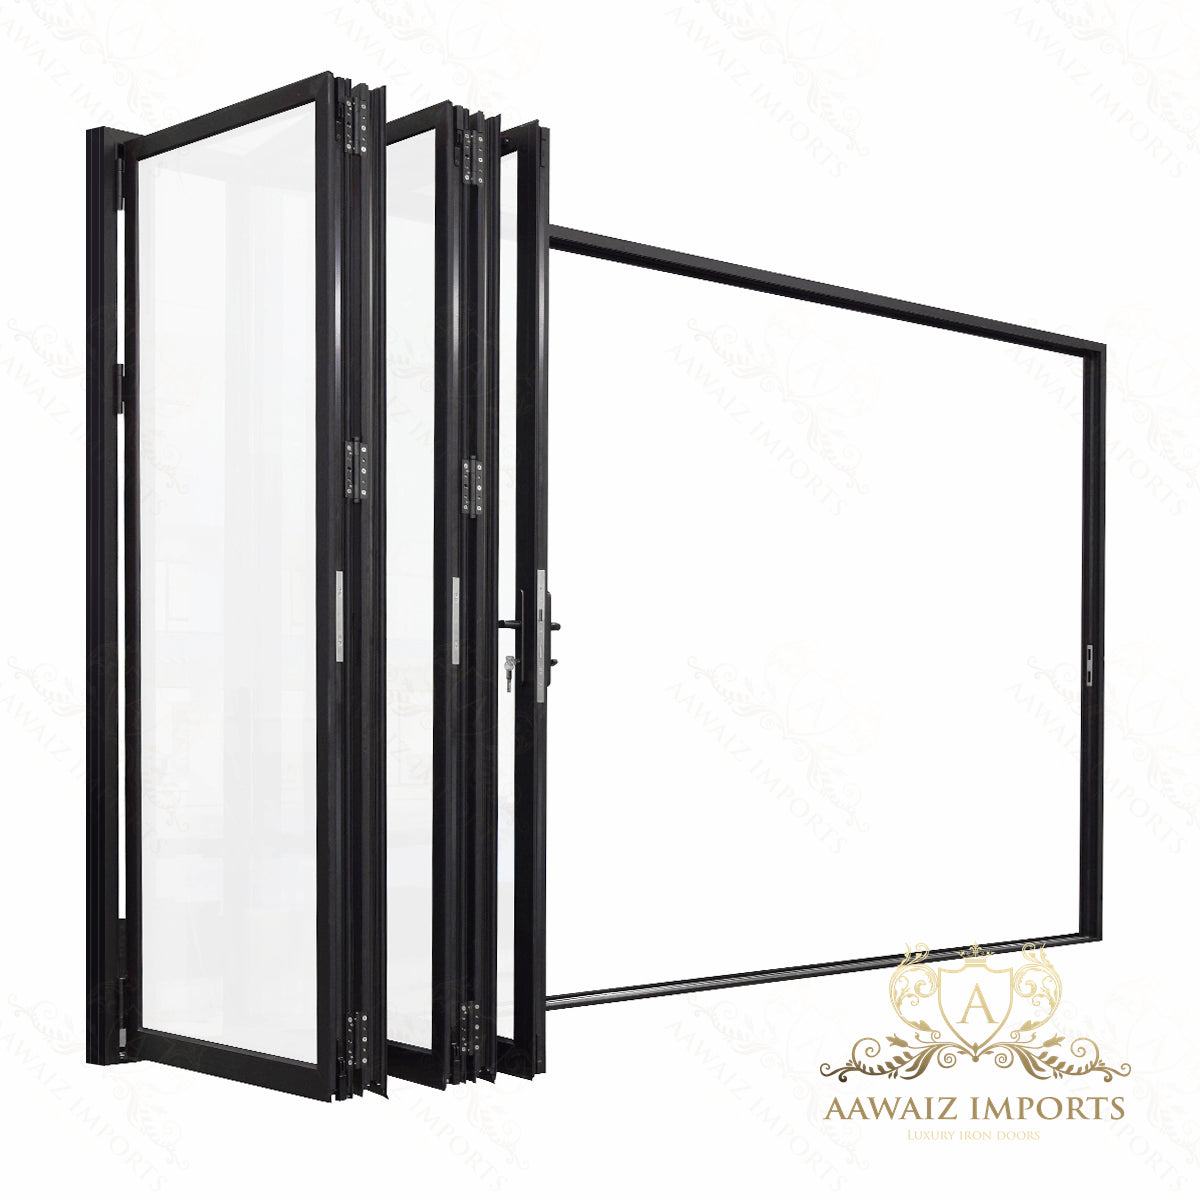 14 Ft Wide By 8 Ft Tall (168" By 96") Aluminum Bi Fold Patio Door Outswing  Thermal Break Insulated Matt Black Finish